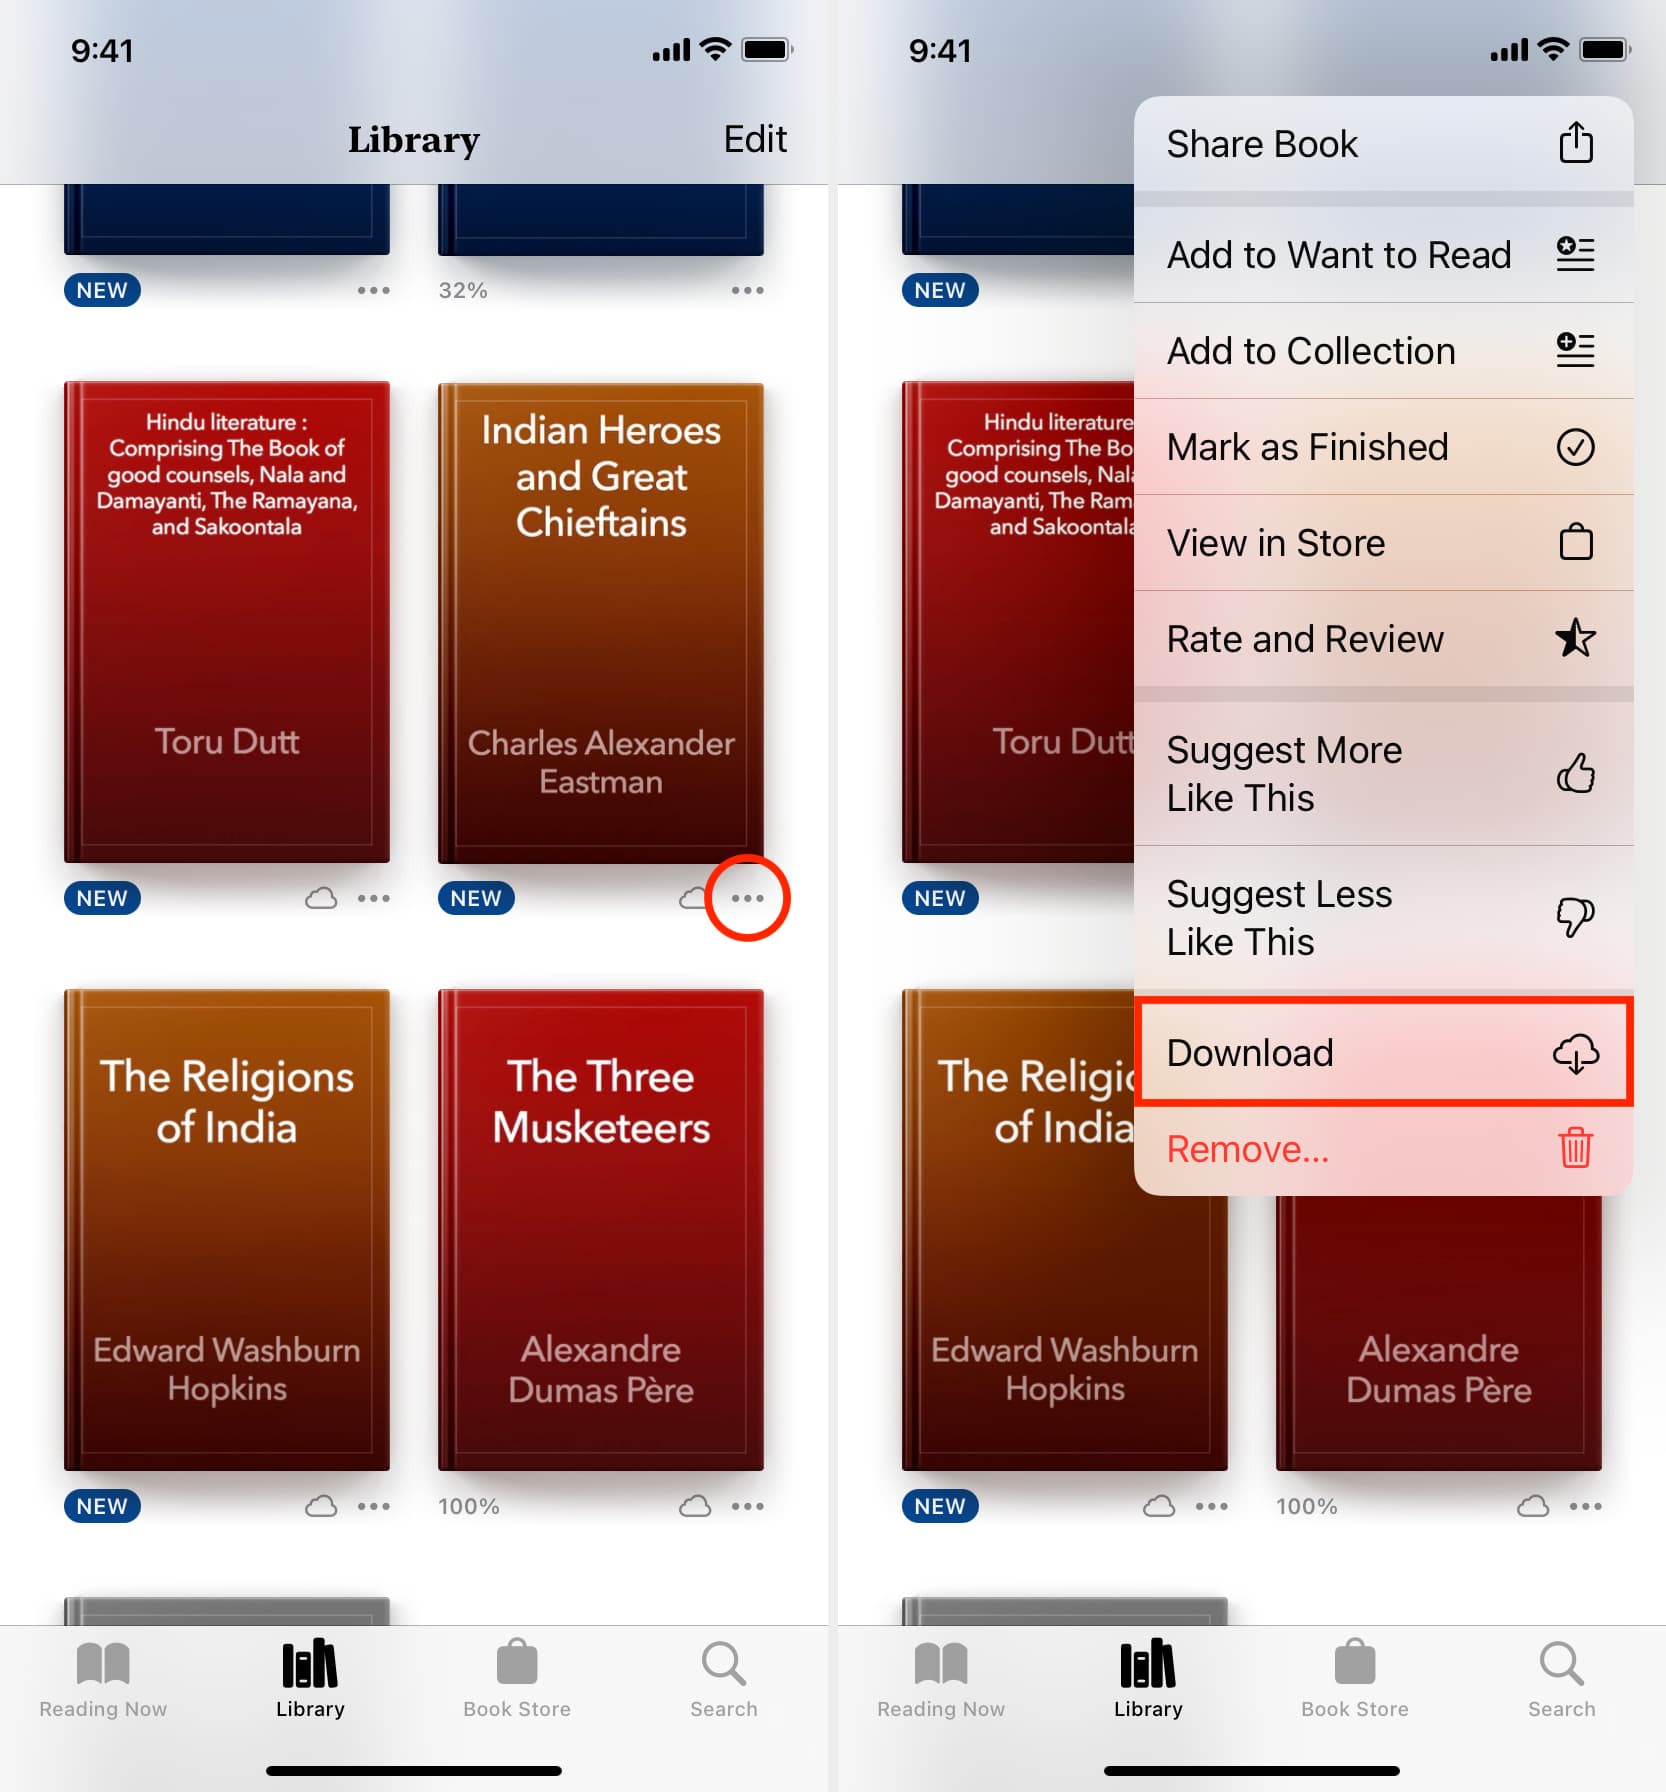 Re-download deleted books in iPhone Books app